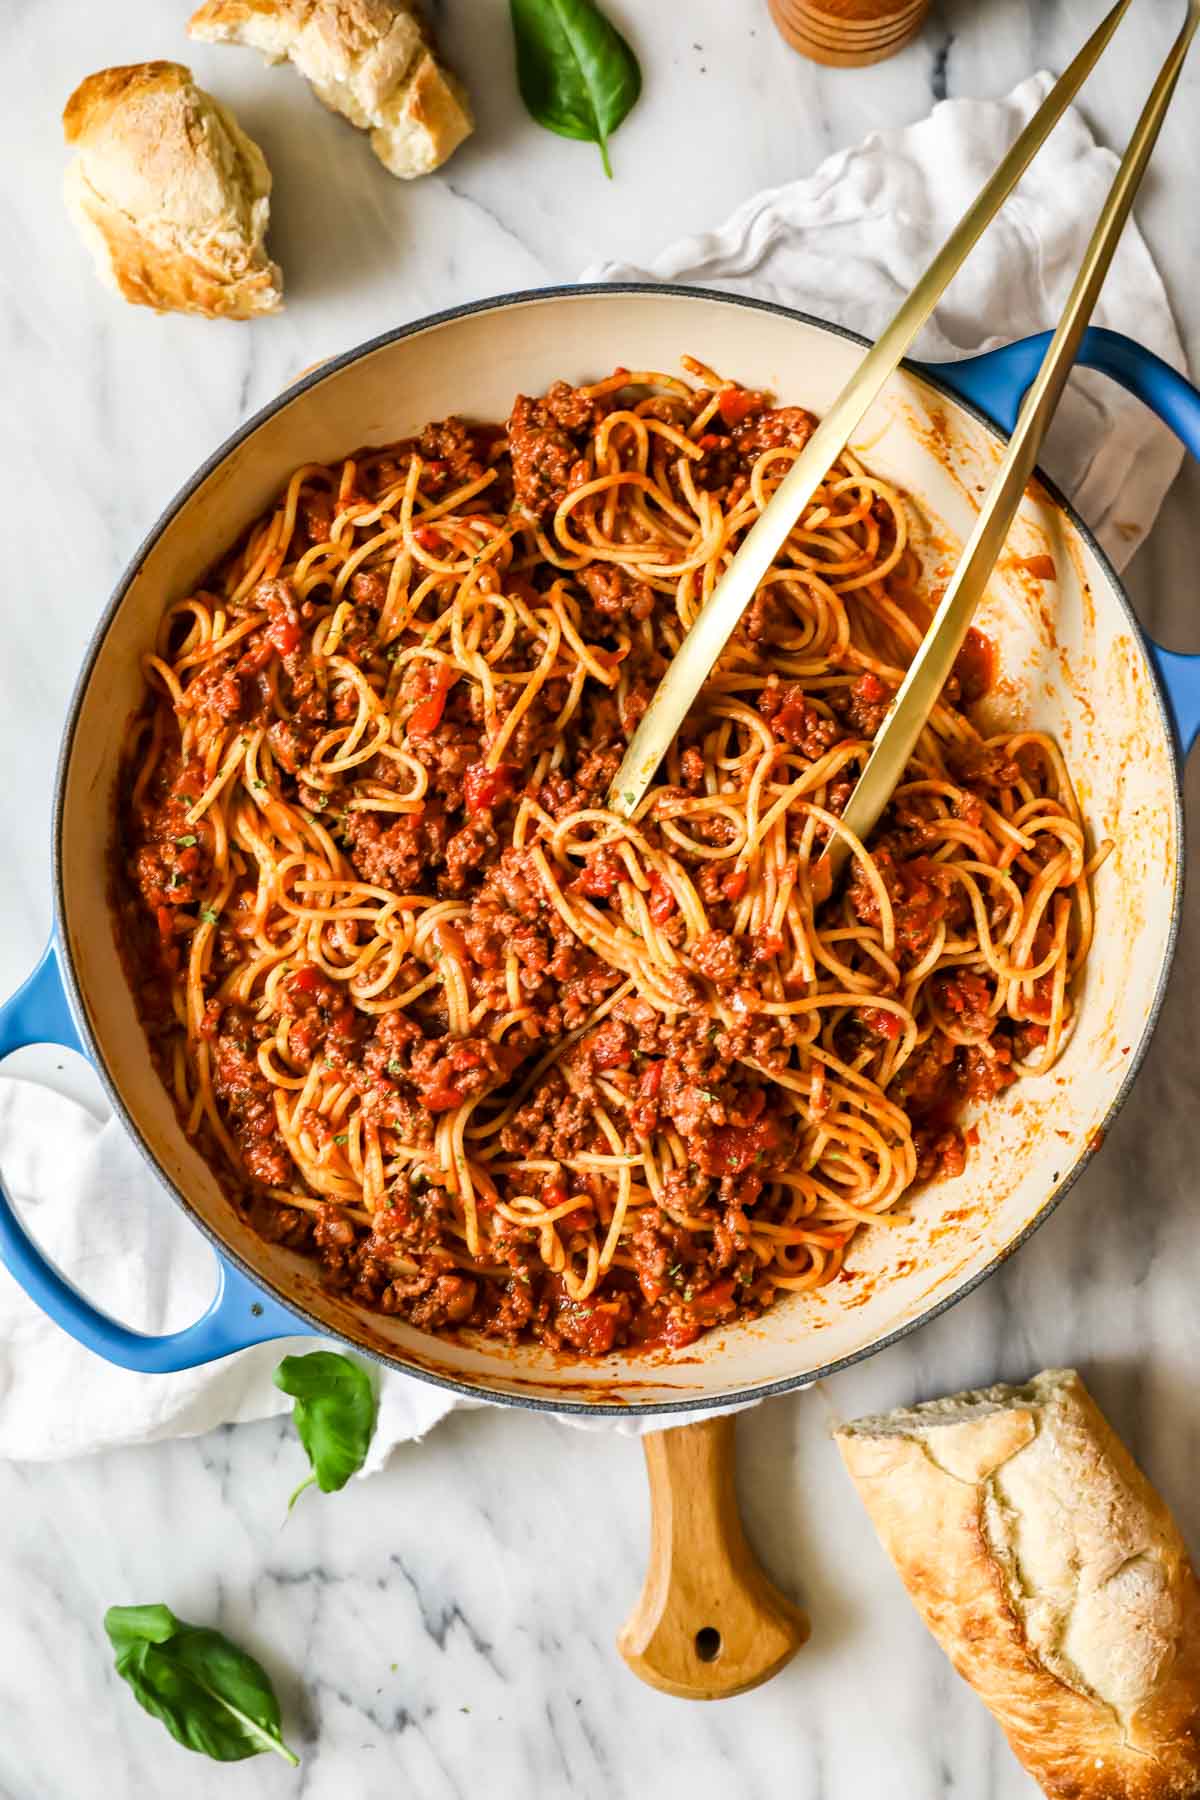 Overhead view of a large saucepan of spaghetti with meat sauce.